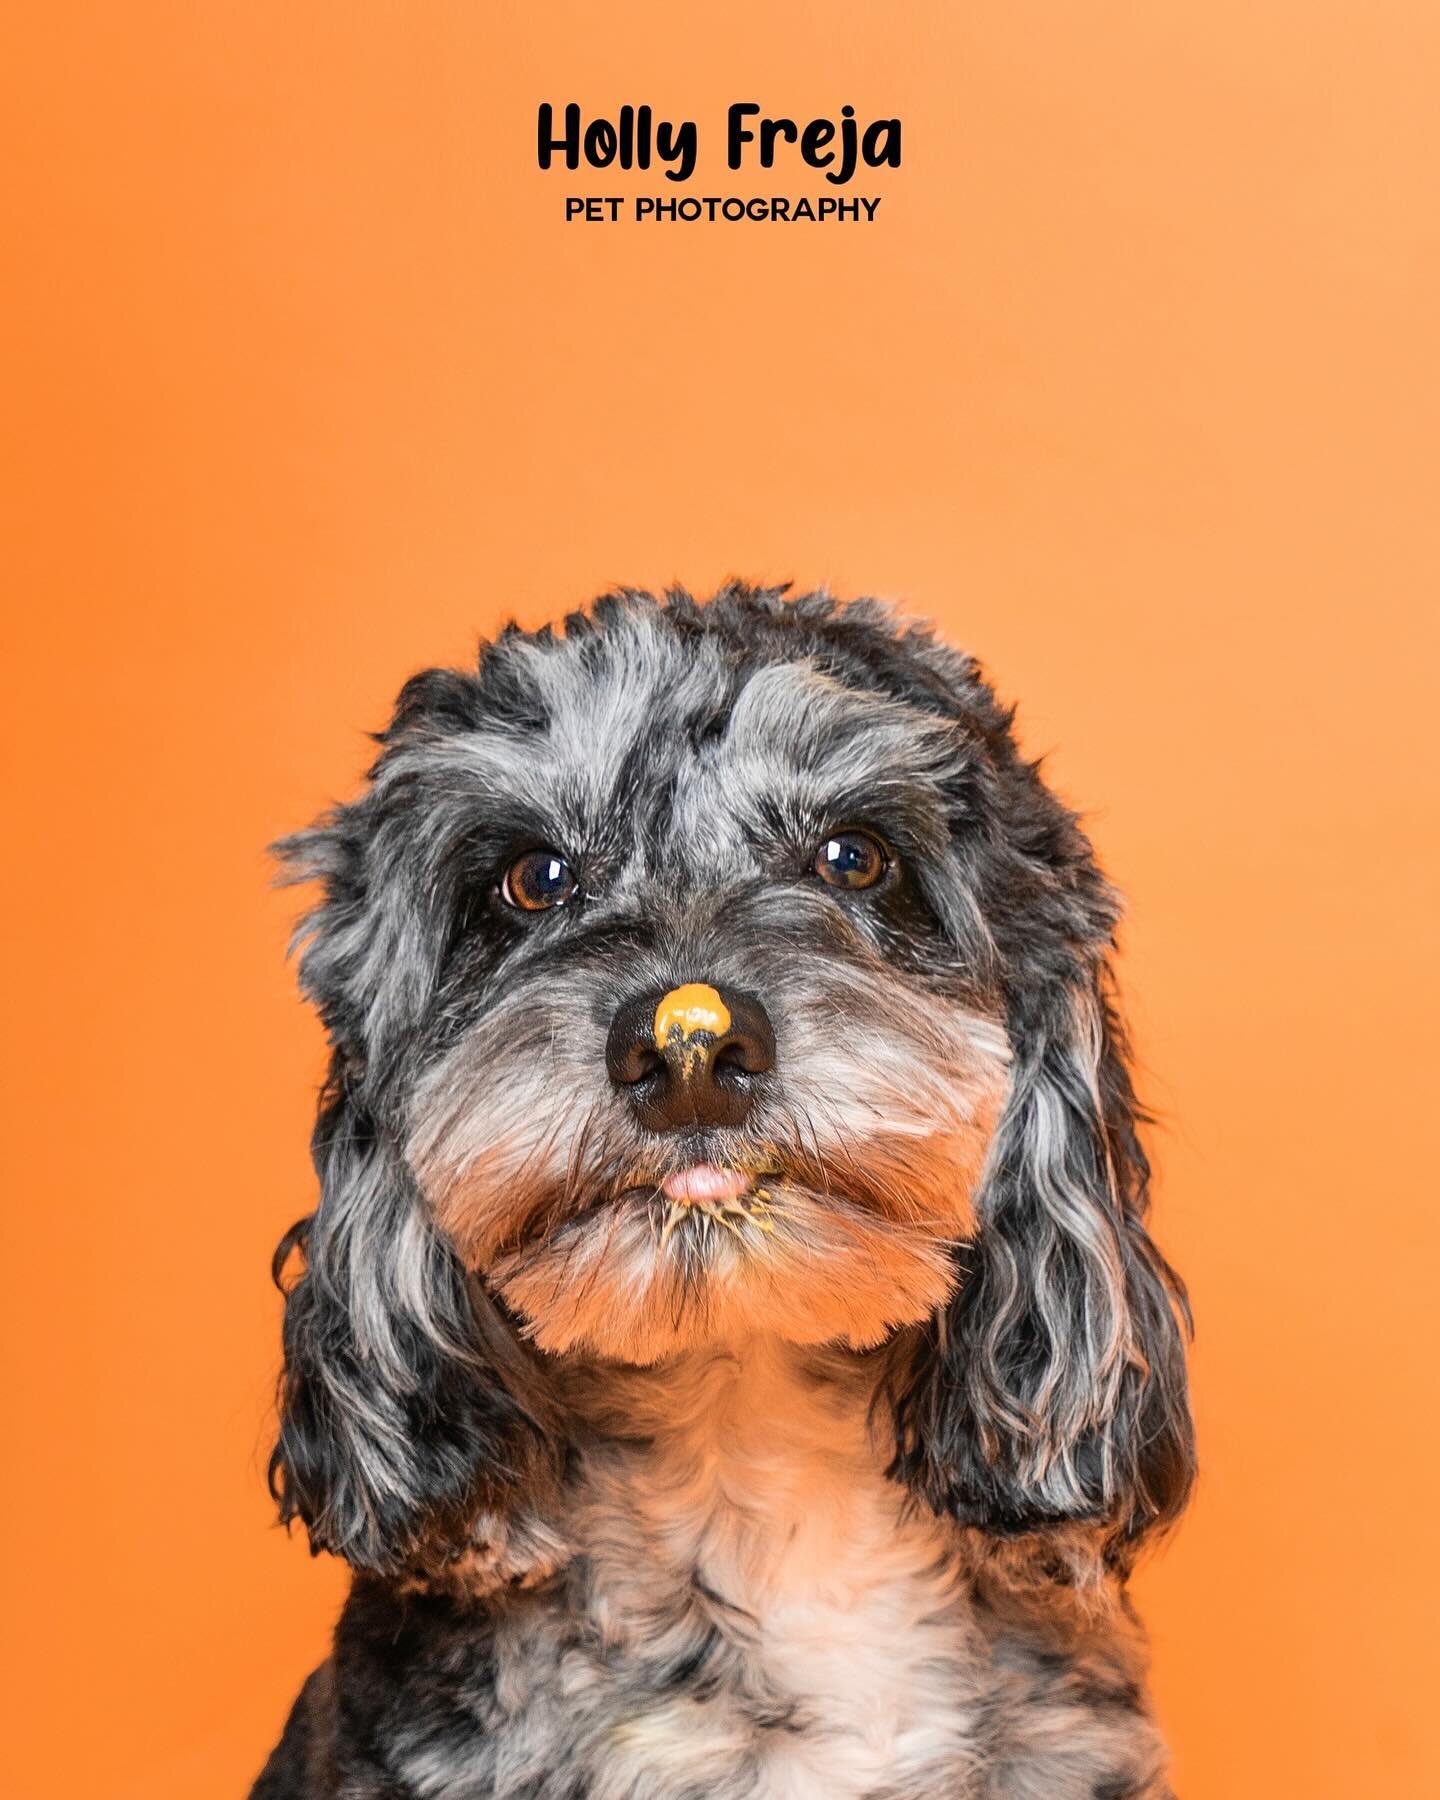 Capture the essence of your furry friend in a timeless portrait! 🐾✨ Ready to book a personalised pet photography session? DM me now to schedule your session and let&rsquo;s create lasting memories together! 📸

🐶 #PetPhotography #CaptureTheLove #Bo